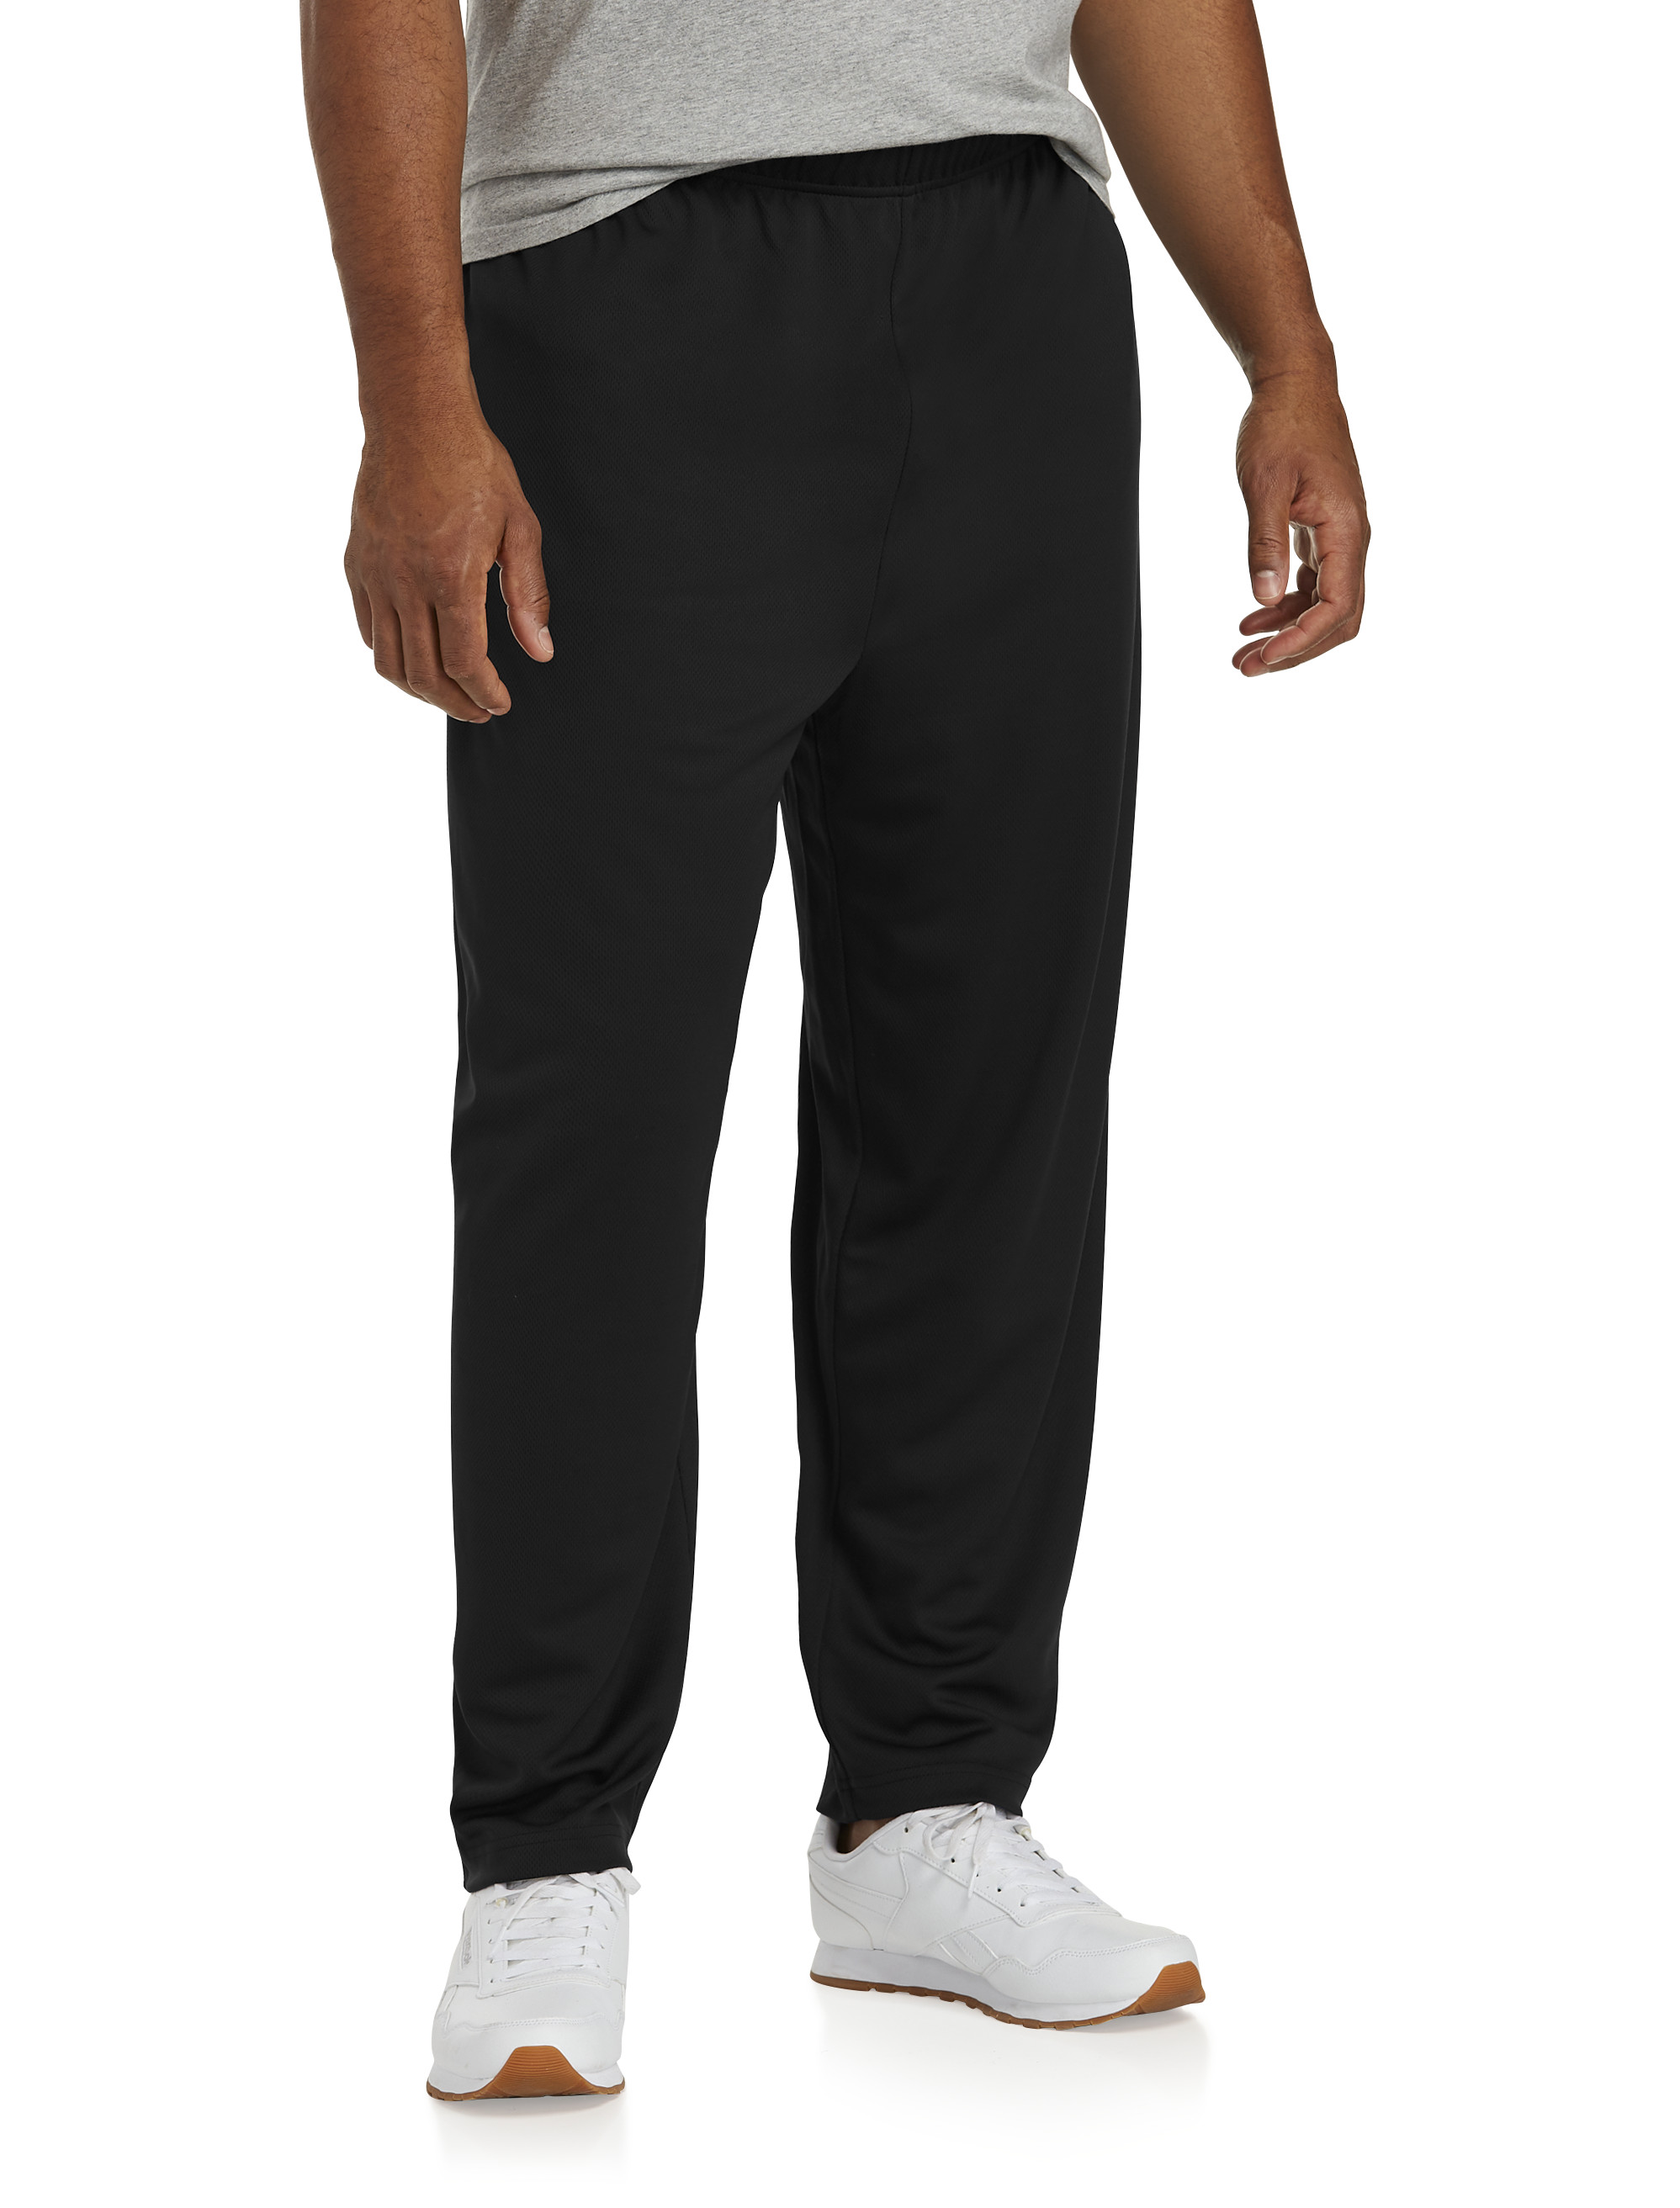 Hanes Double Knit Pants With Pockets